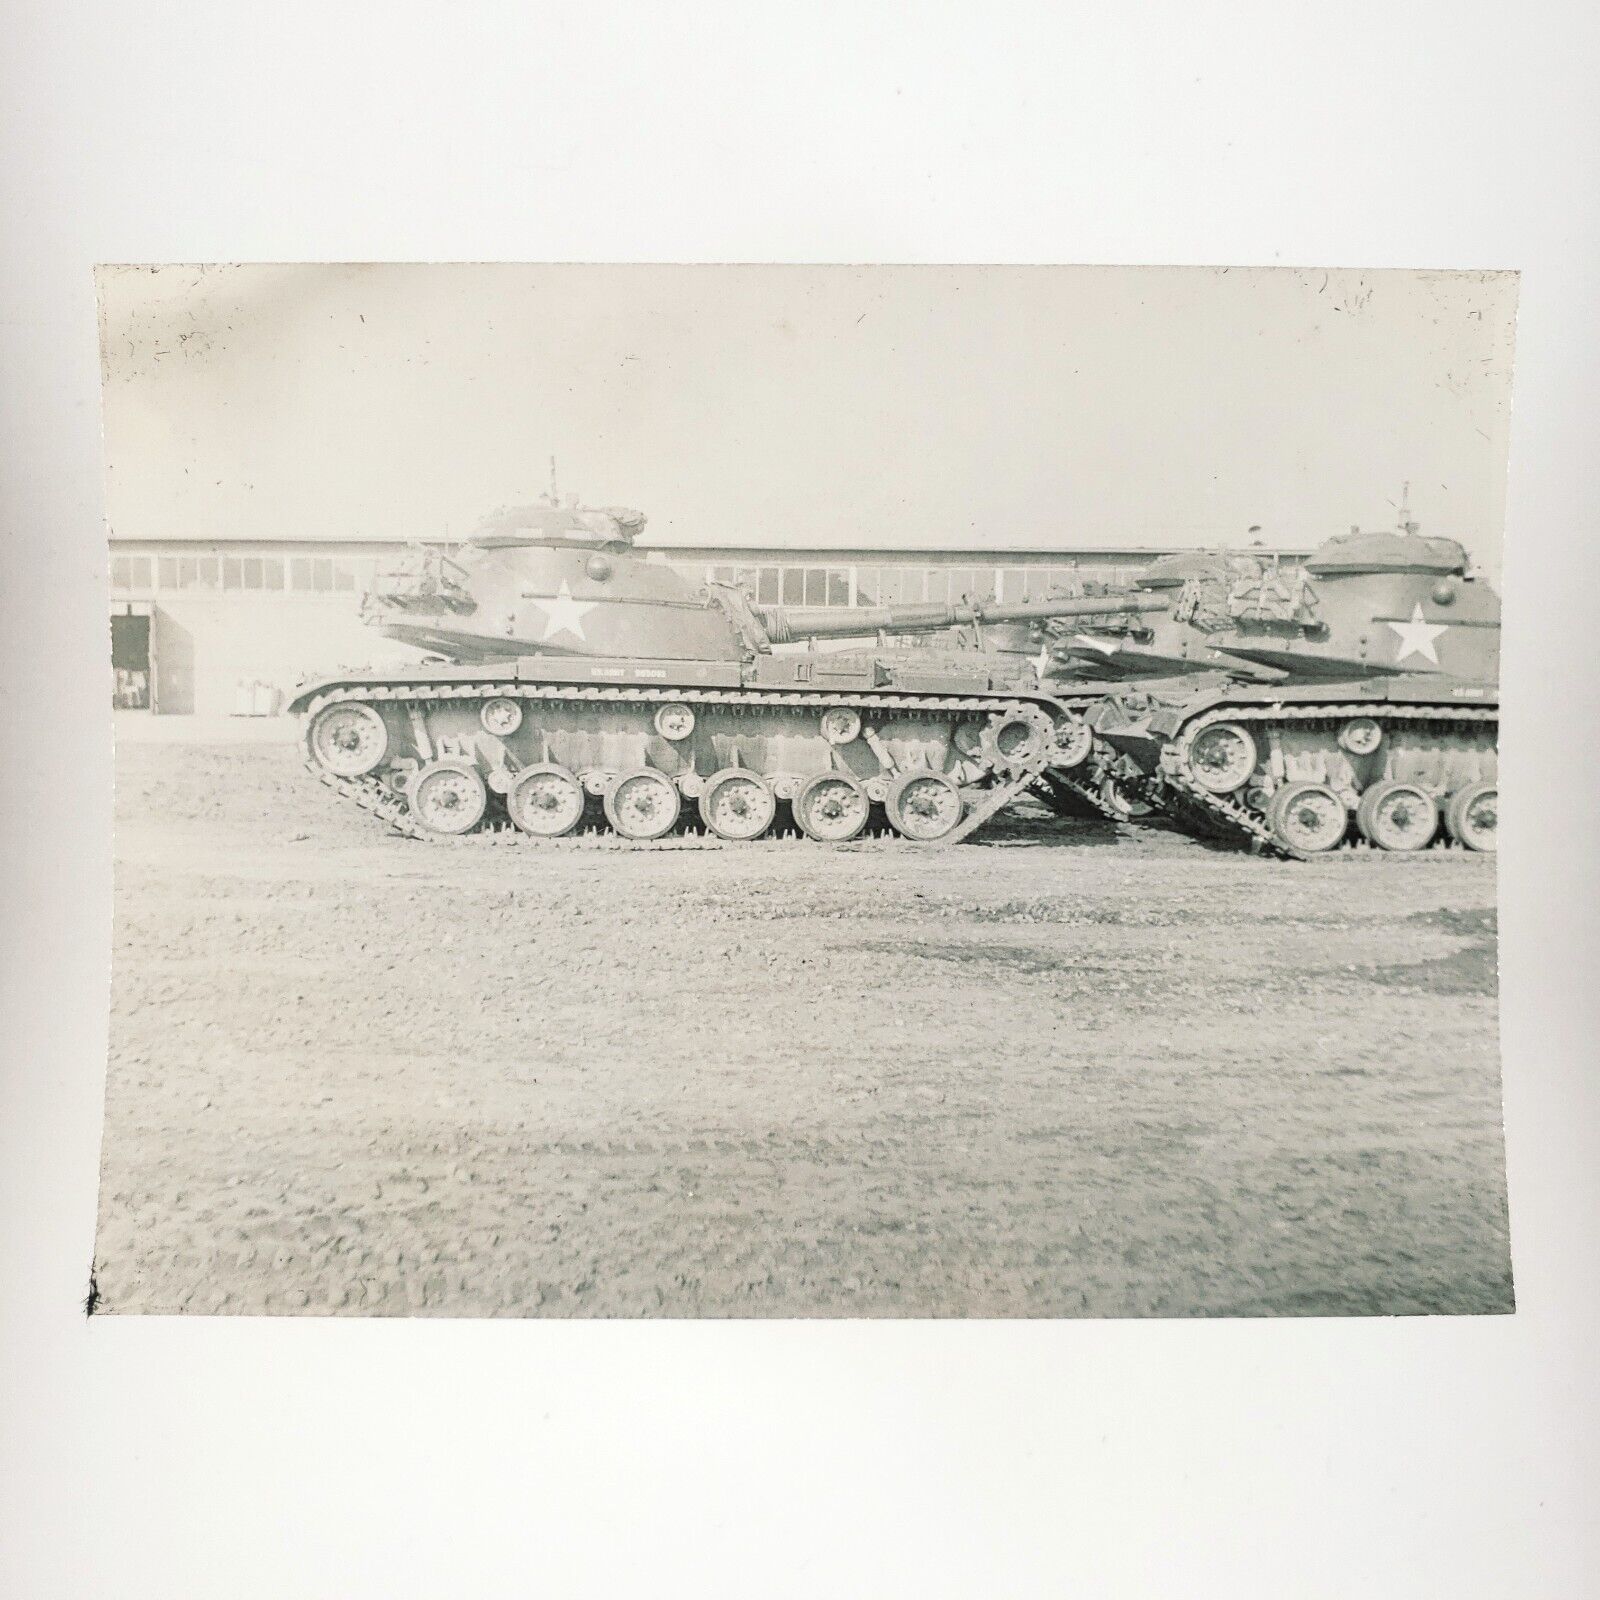 Army Tanks Germany Barracks Photo 1960s Army Soldier Military Snapshot A3935